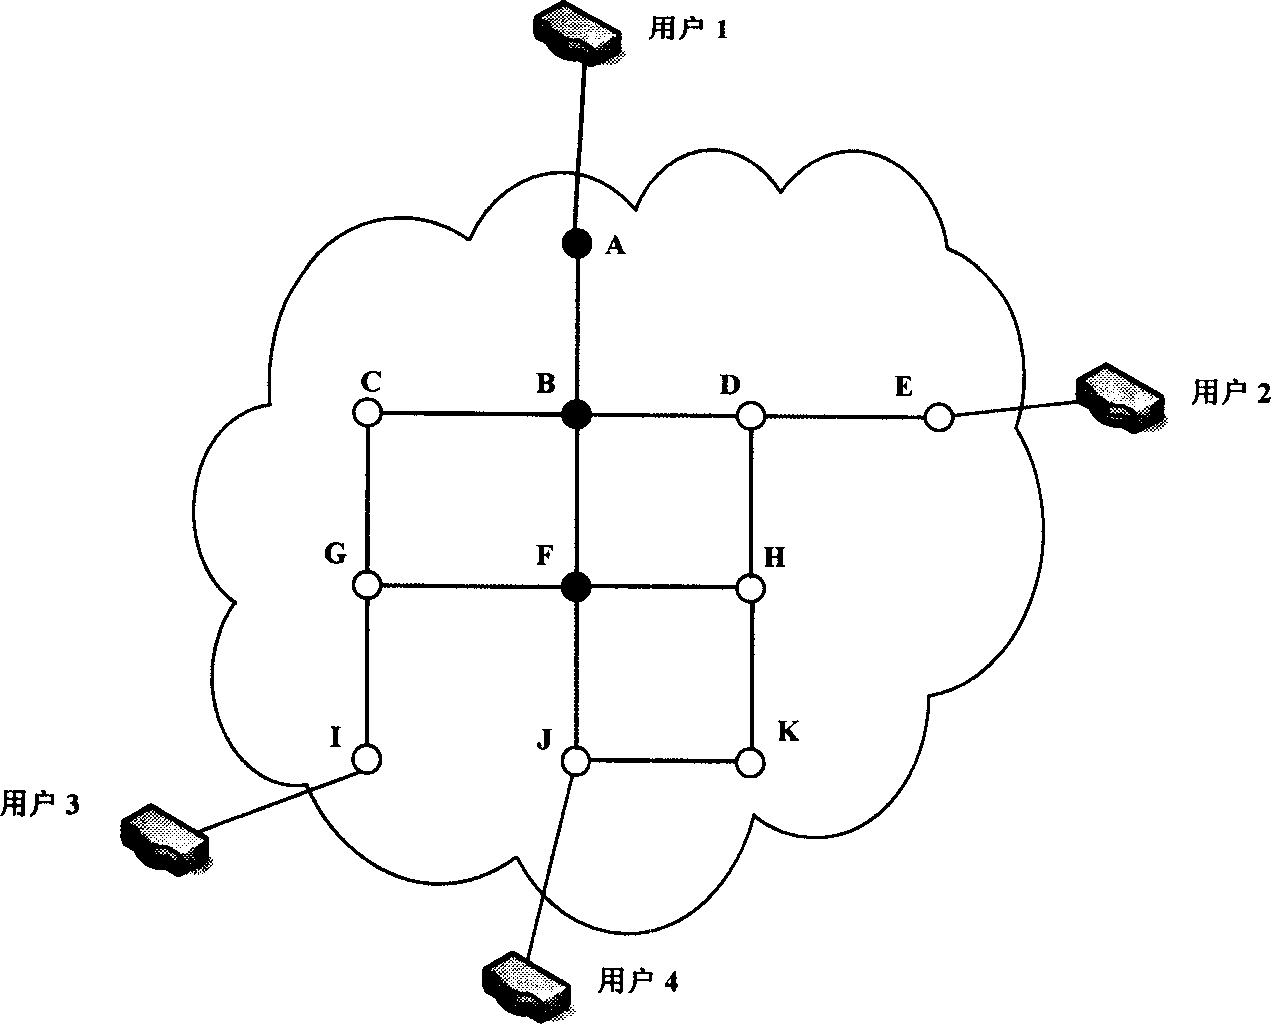 A recovery method for multicast service connection in automatic switching optical network